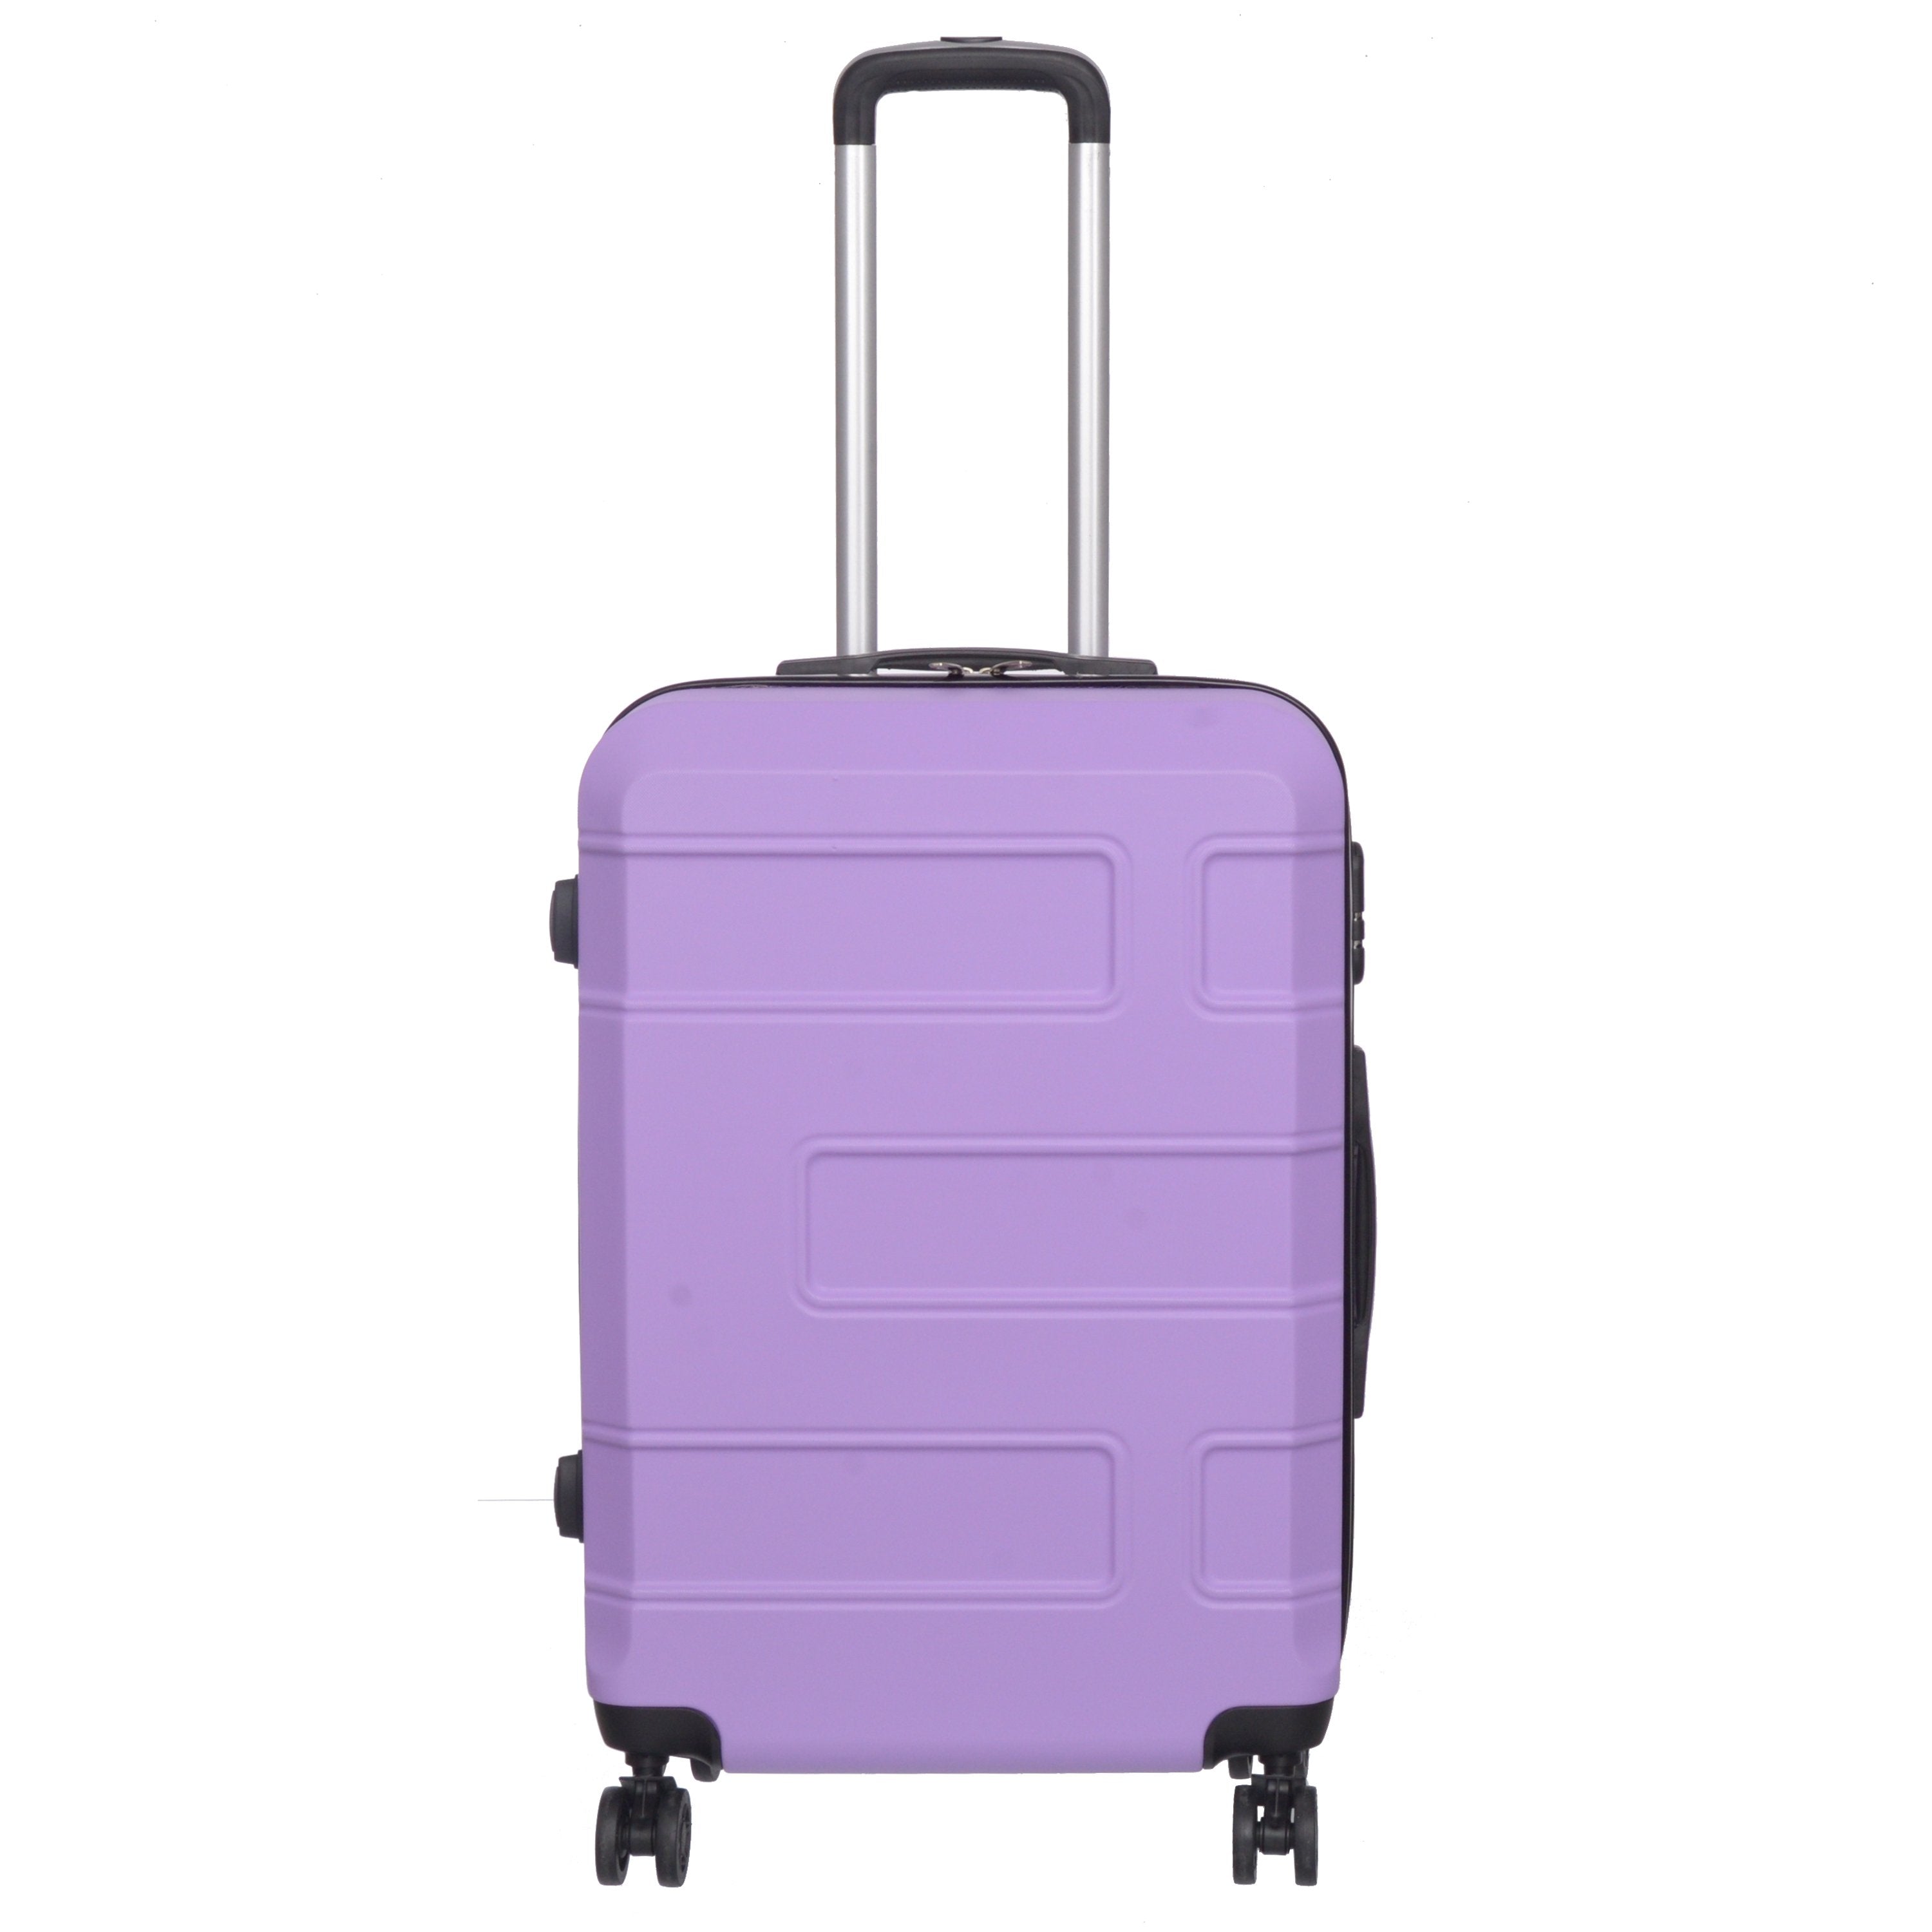 High Flying High Rolling 3 Piece Luggage Set The Groovalution